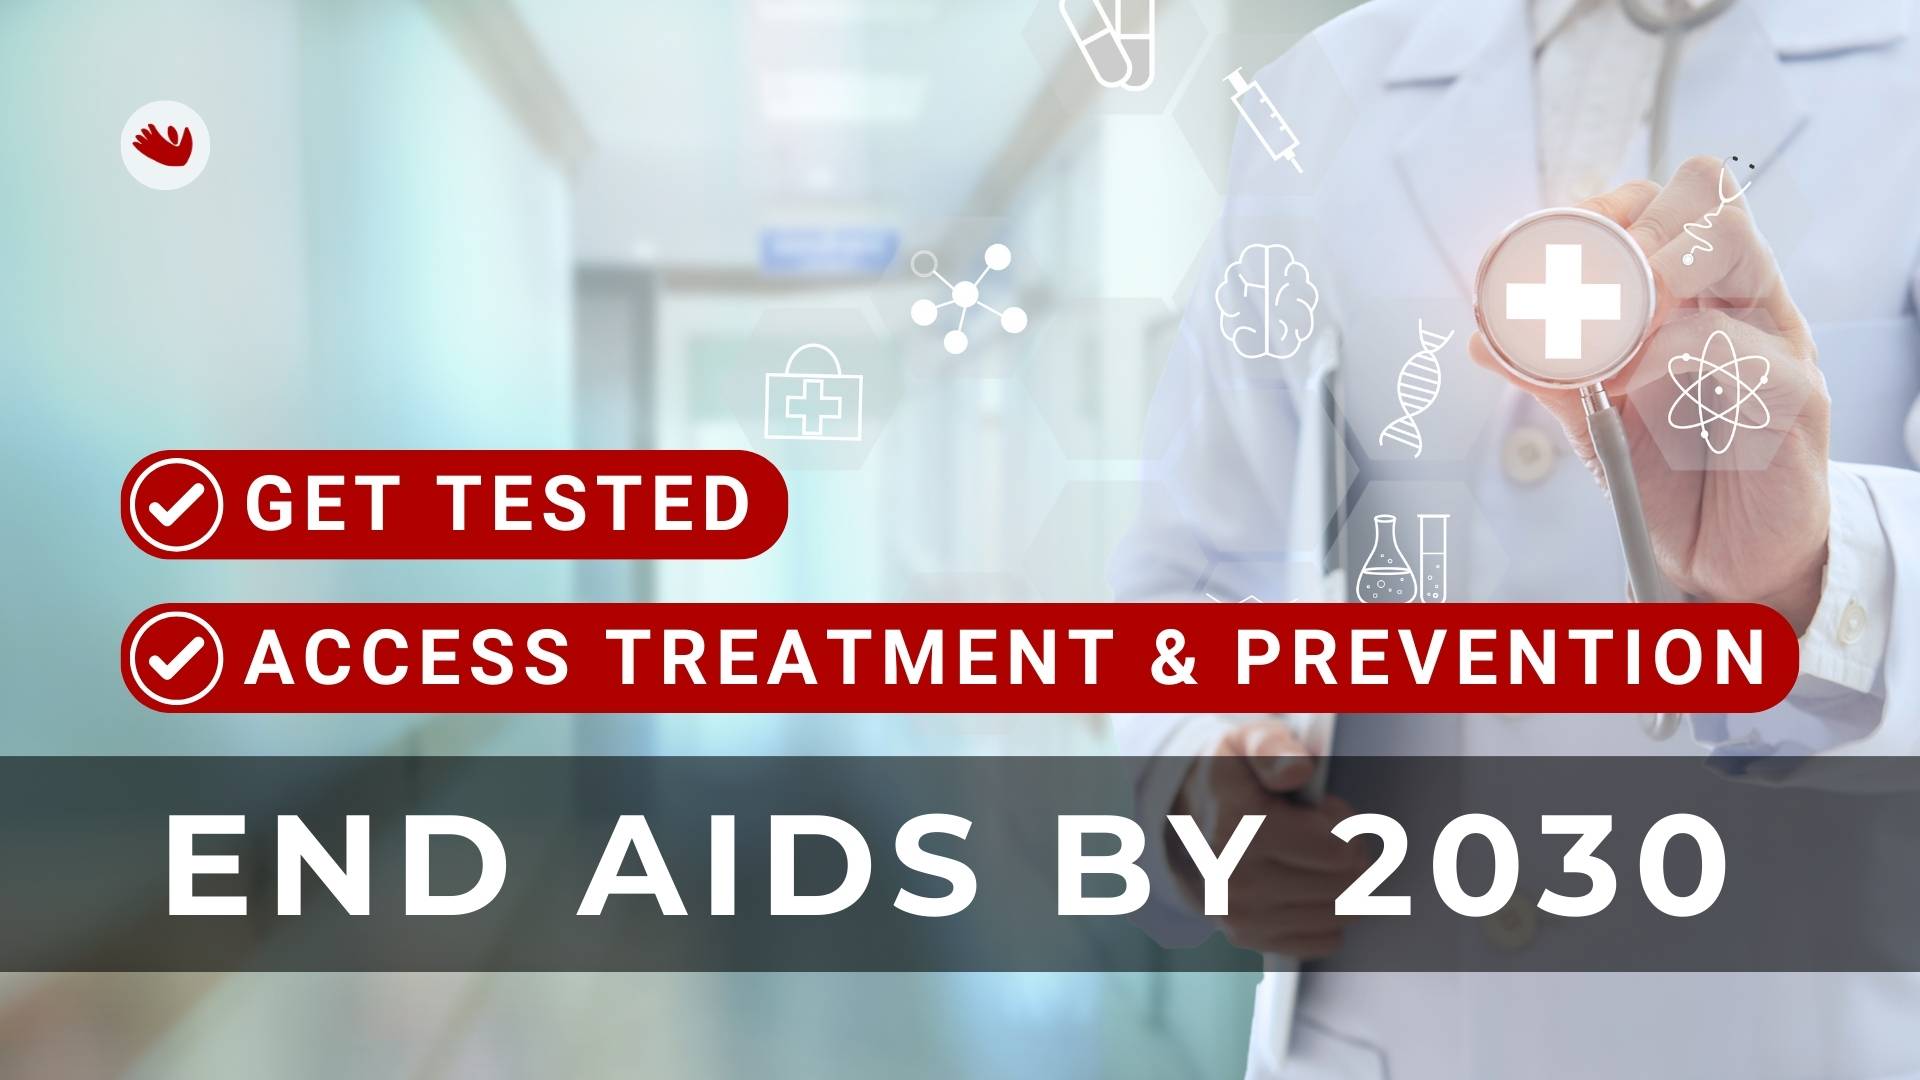 END AIDS BY 2030, Institute of Infectious Diseases, Pune.